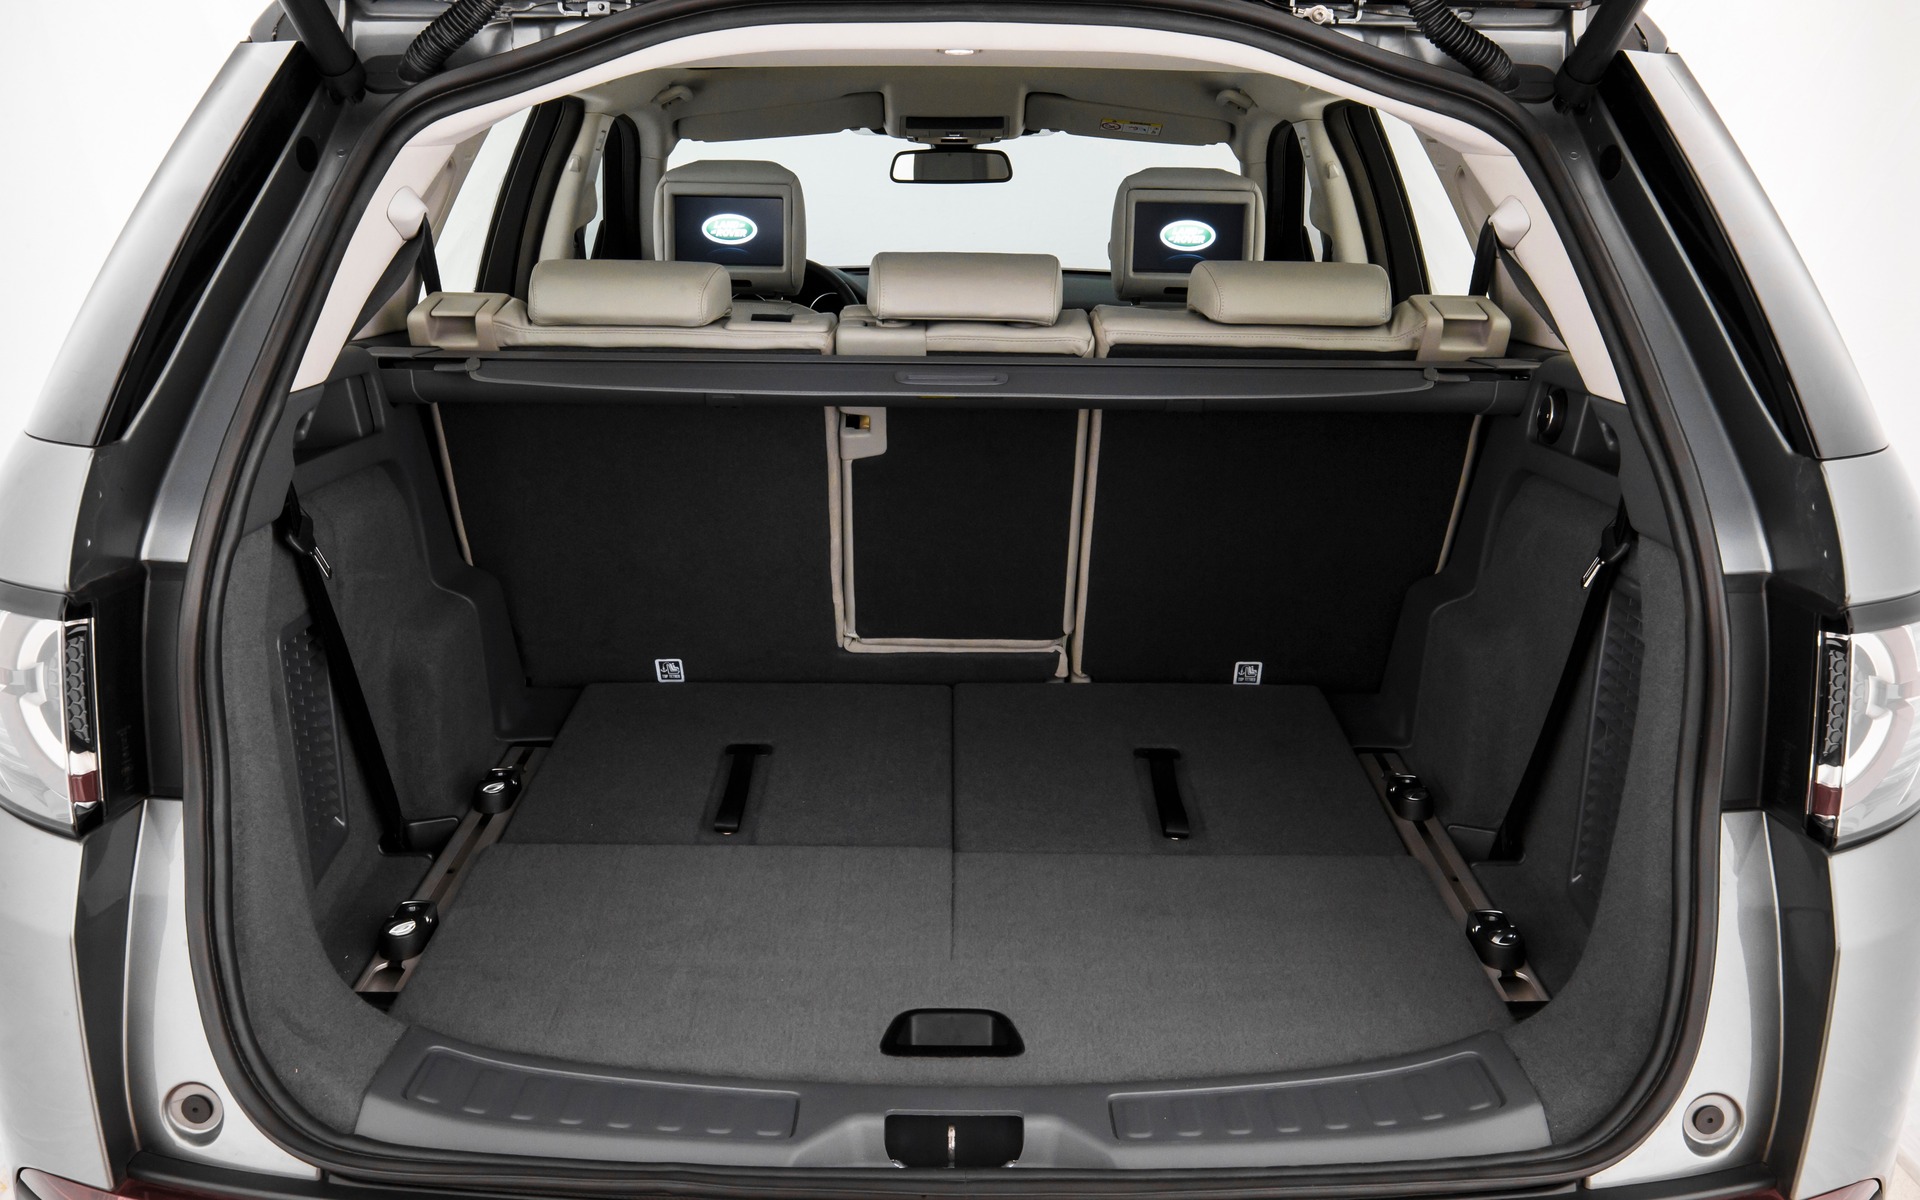 The cargo space with all of the second-row seats in place.